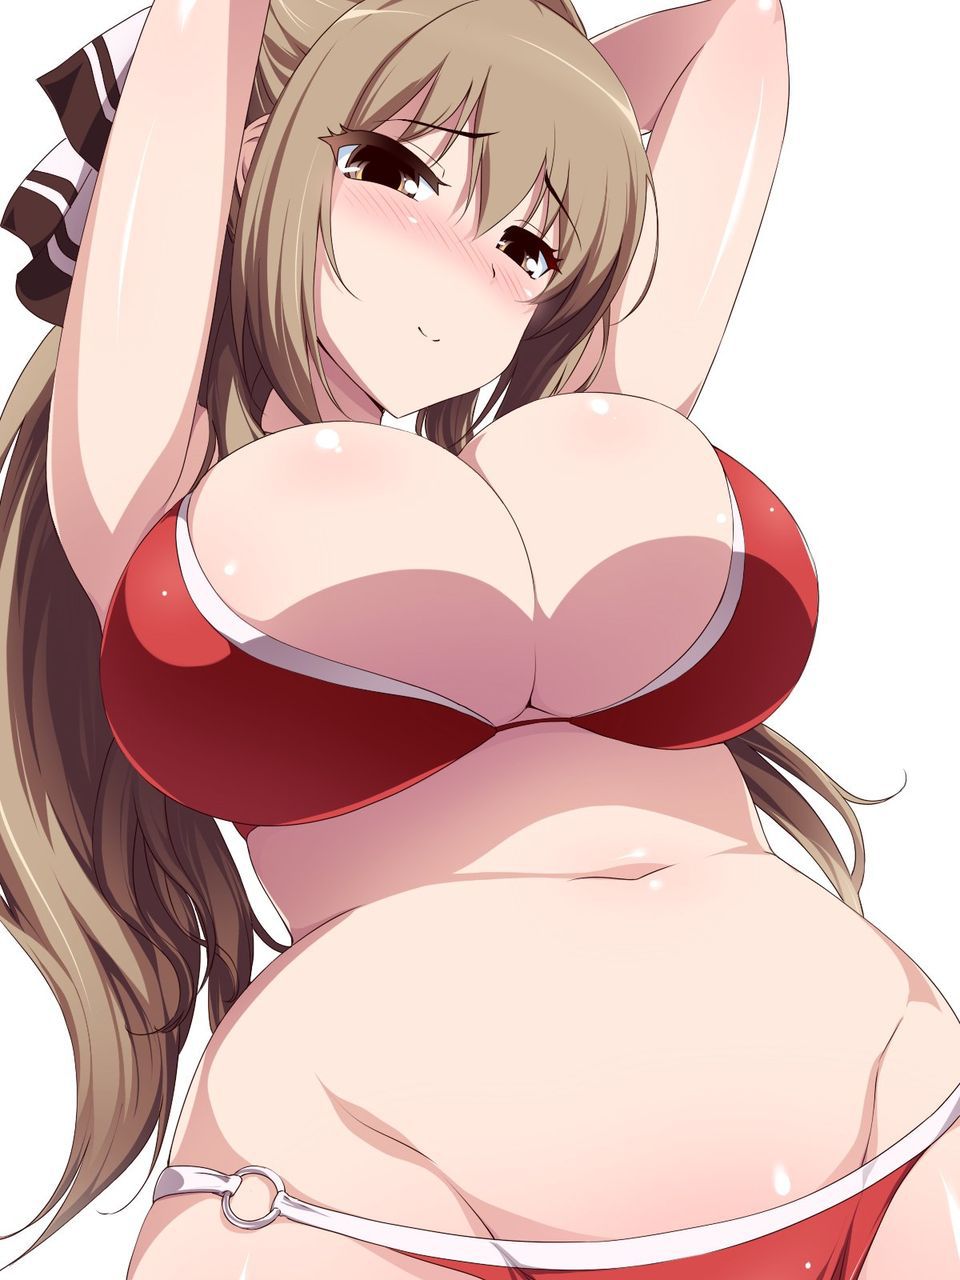 【Secondary Erotic】 The erotic image of 1000 toisuzu of amagi brilliant park appearance character is here 9